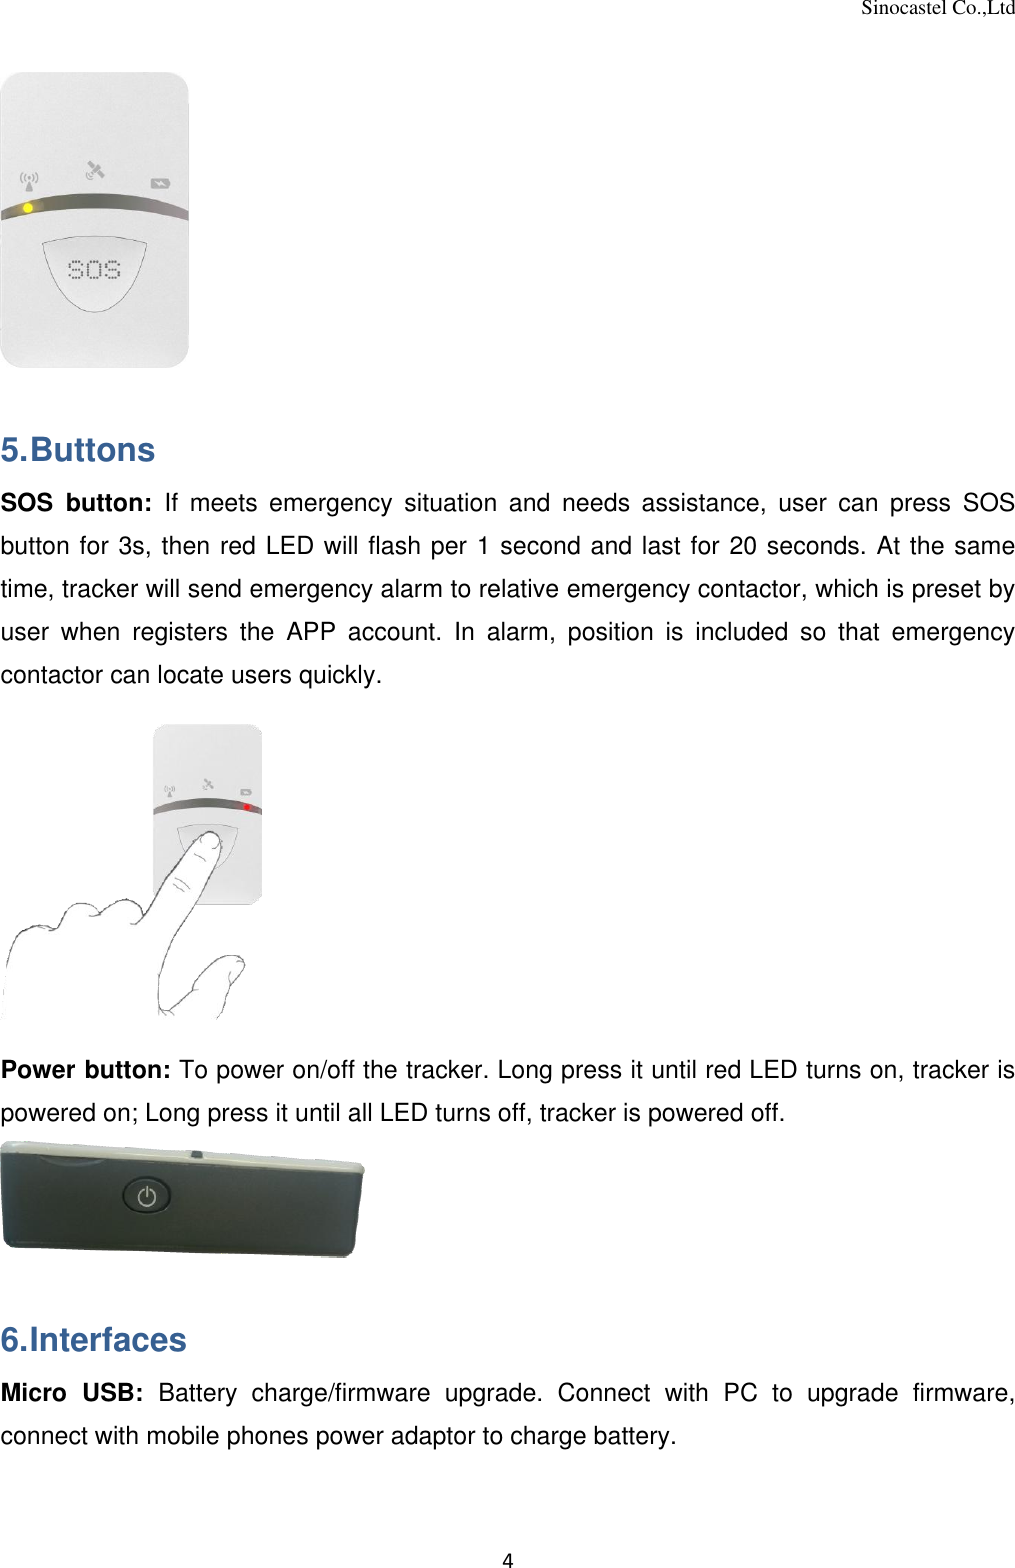 Sinocastel Co.,Ltd 4   5. Buttons SOS  button:  If  meets  emergency  situation  and  needs  assistance,  user  can  press  SOS button for 3s, then red LED will flash per 1 second and last for 20 seconds. At the same time, tracker will send emergency alarm to relative emergency contactor, which is preset by user  when  registers  the  APP  account.  In  alarm,  position  is  included  so  that  emergency contactor can locate users quickly.   Power button: To power on/off the tracker. Long press it until red LED turns on, tracker is powered on; Long press it until all LED turns off, tracker is powered off.   6. Interfaces Micro  USB:  Battery  charge/firmware  upgrade.  Connect  with  PC  to  upgrade  firmware, connect with mobile phones power adaptor to charge battery. 